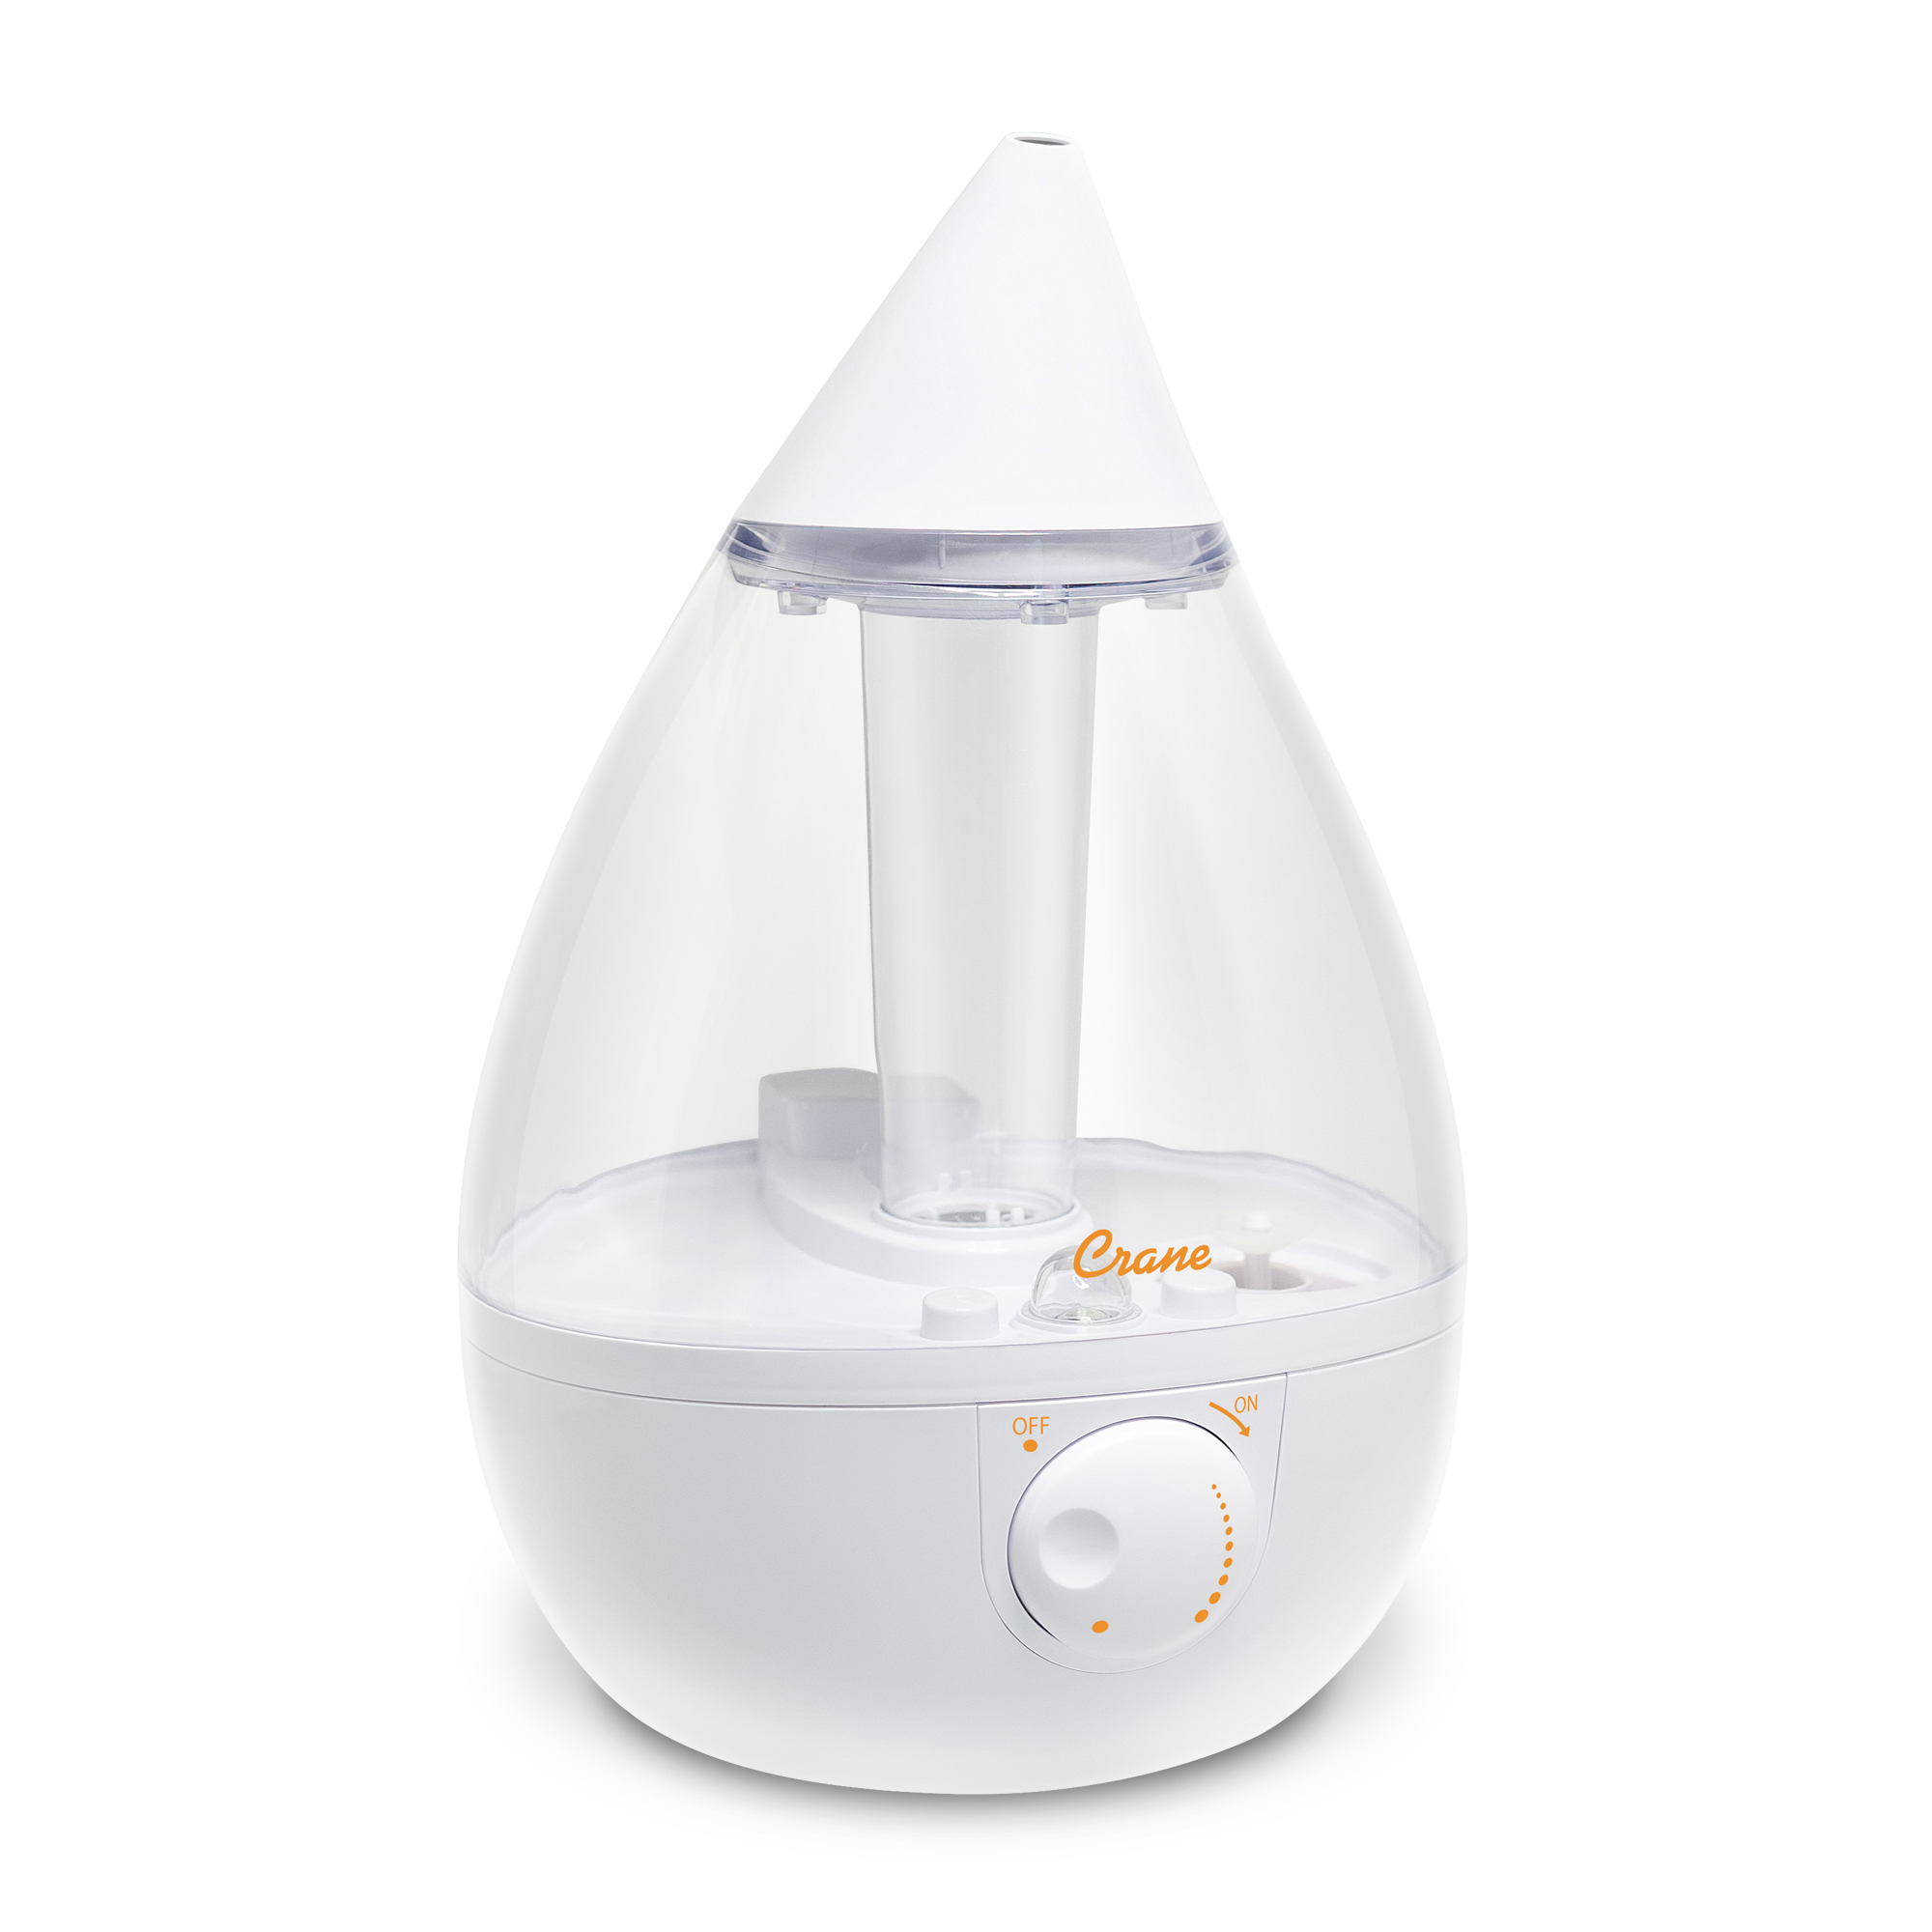 Humidifier main image on white background